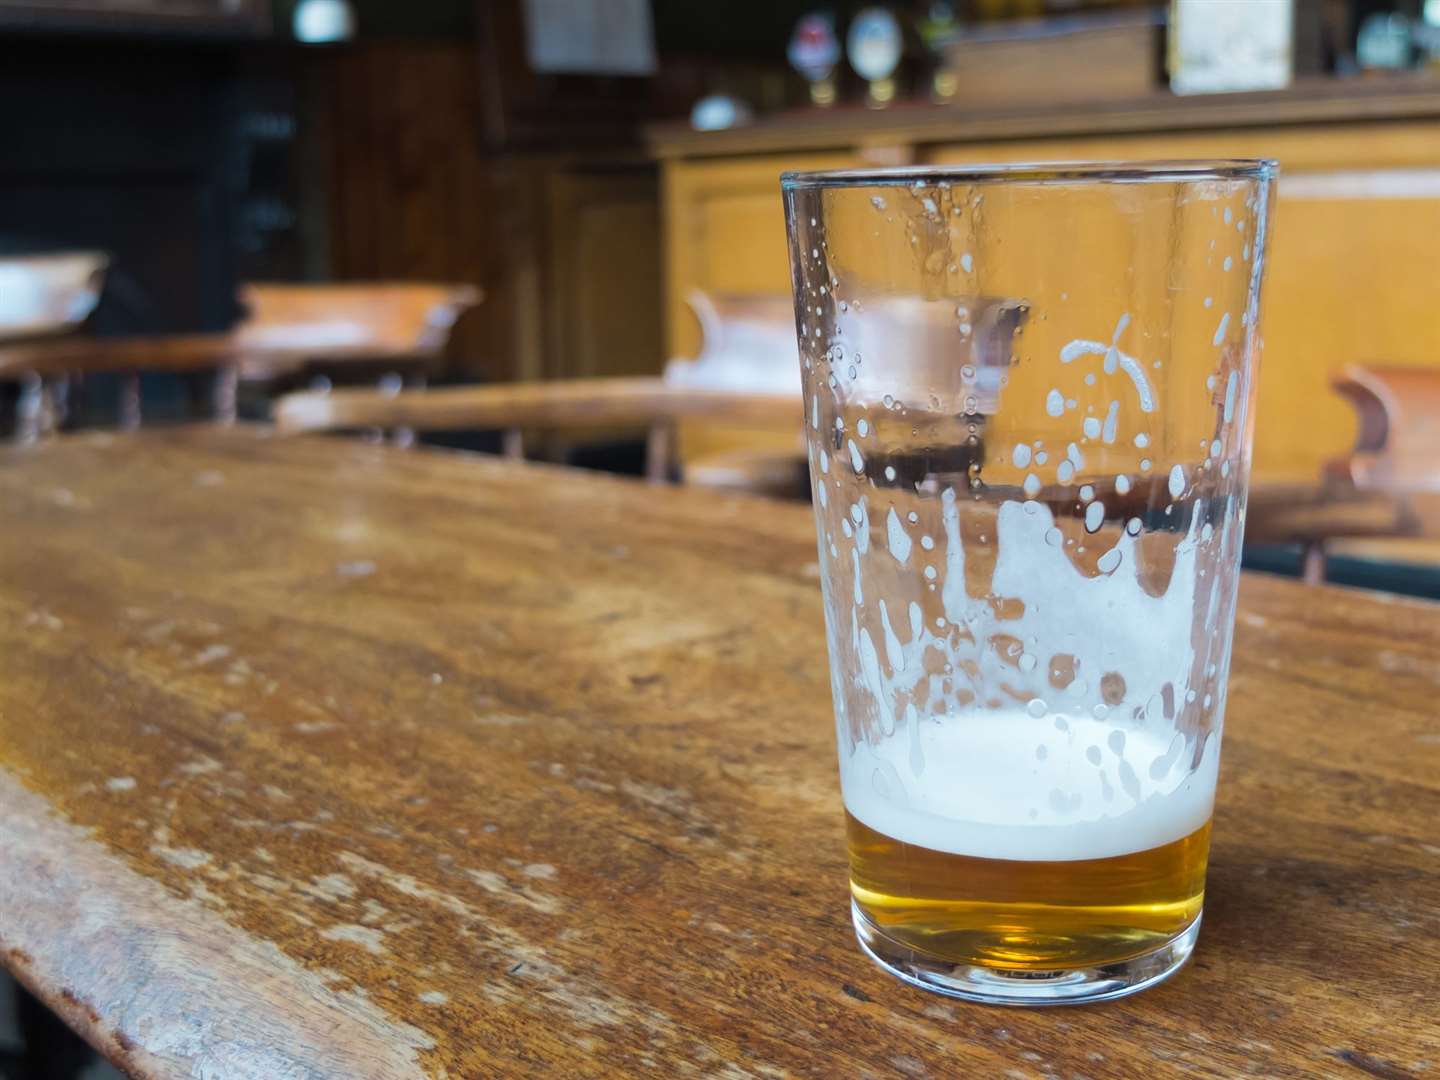 The scheme has now ended but the craft beer pub and eatery is extending it. Pic: Stock image